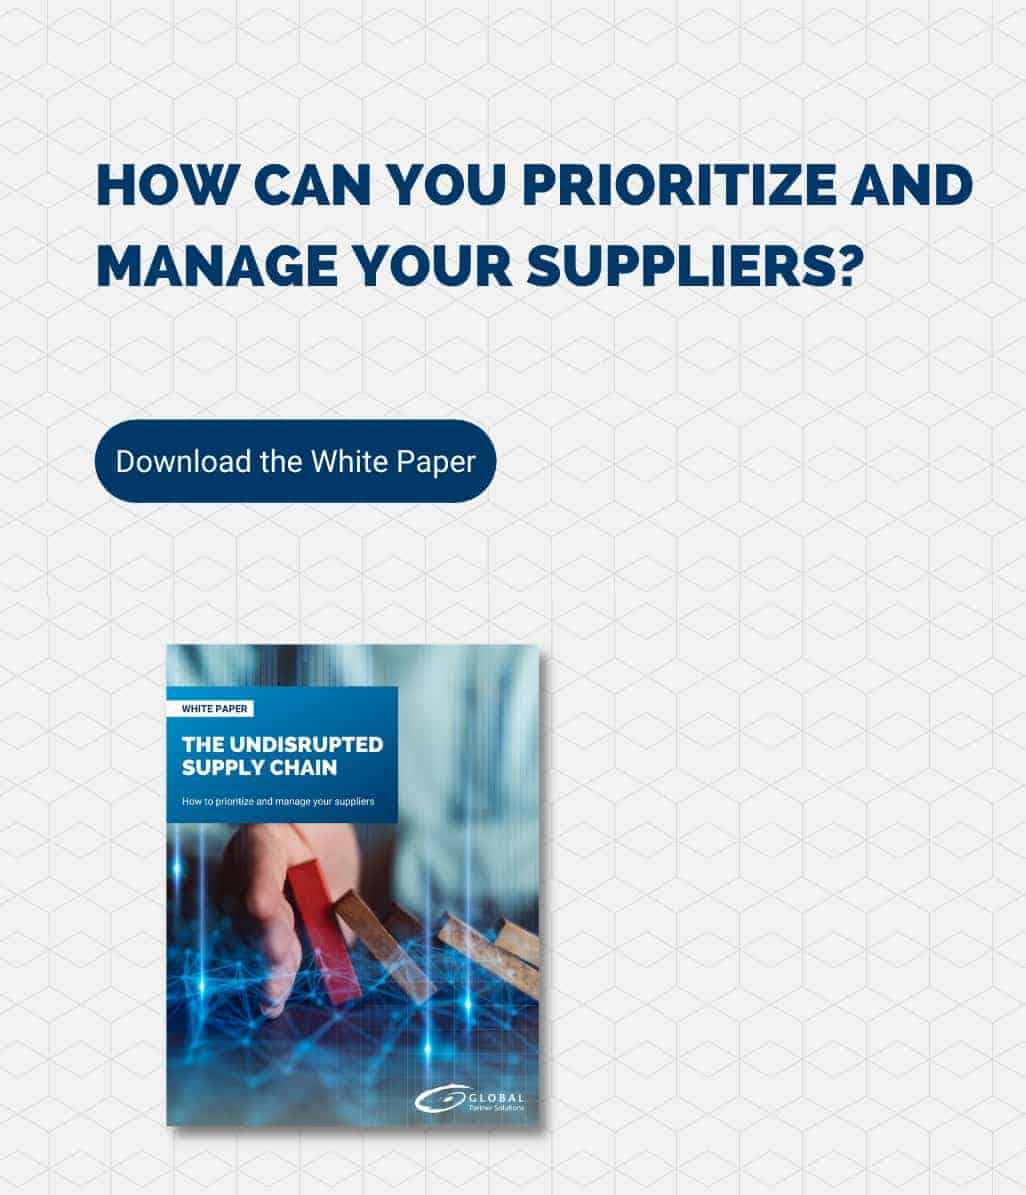 How can you prioritize and manage your suppliers